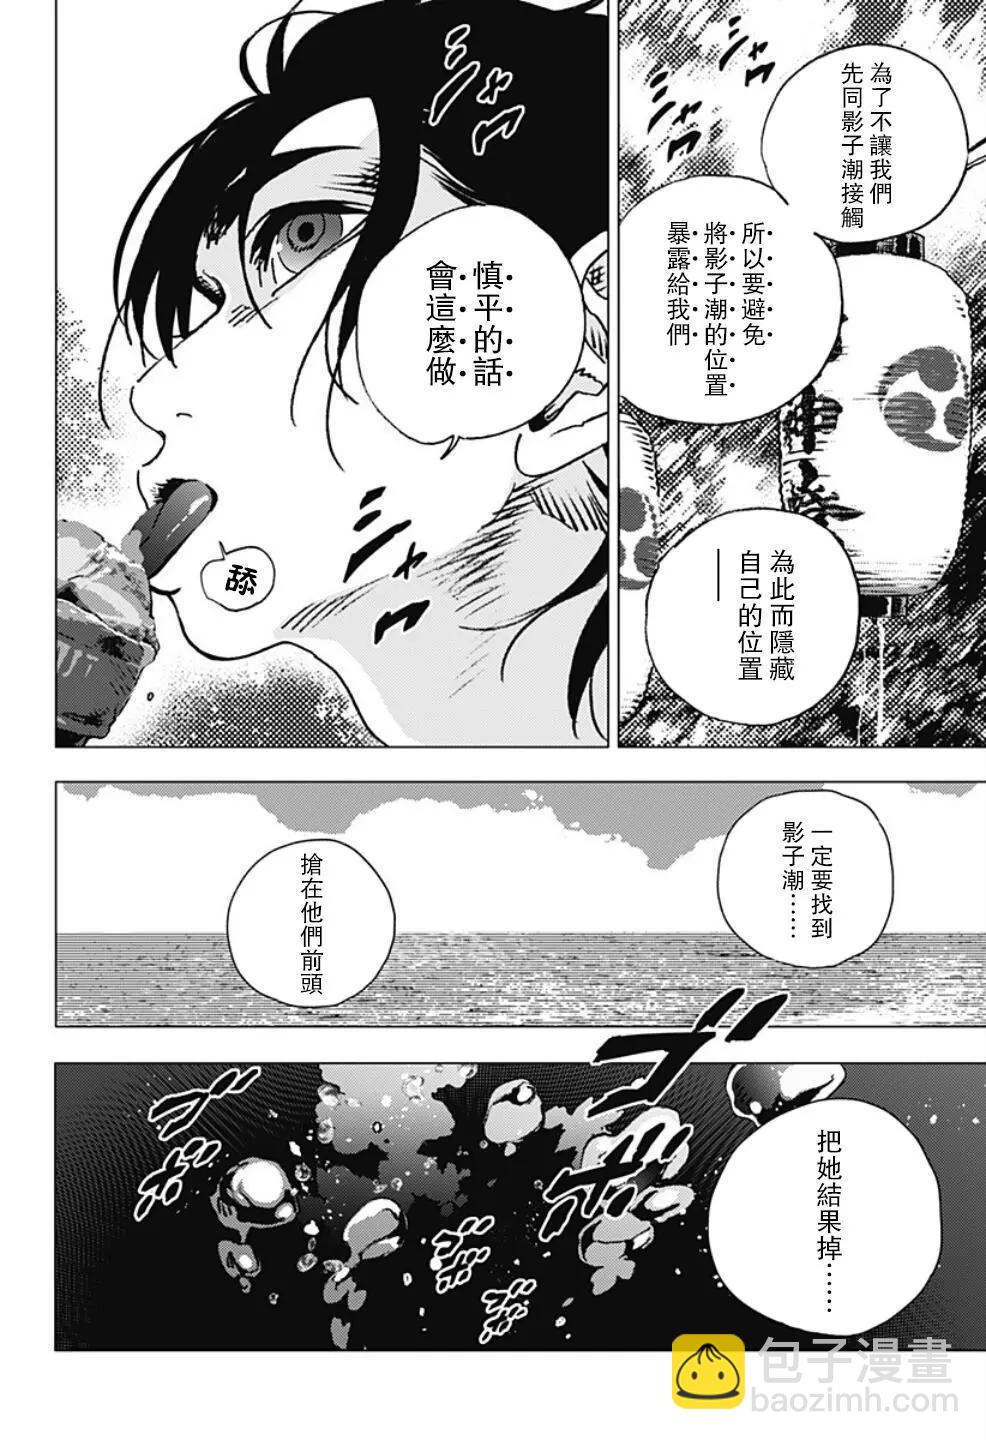 Summer time rendering - 第117話 - 3